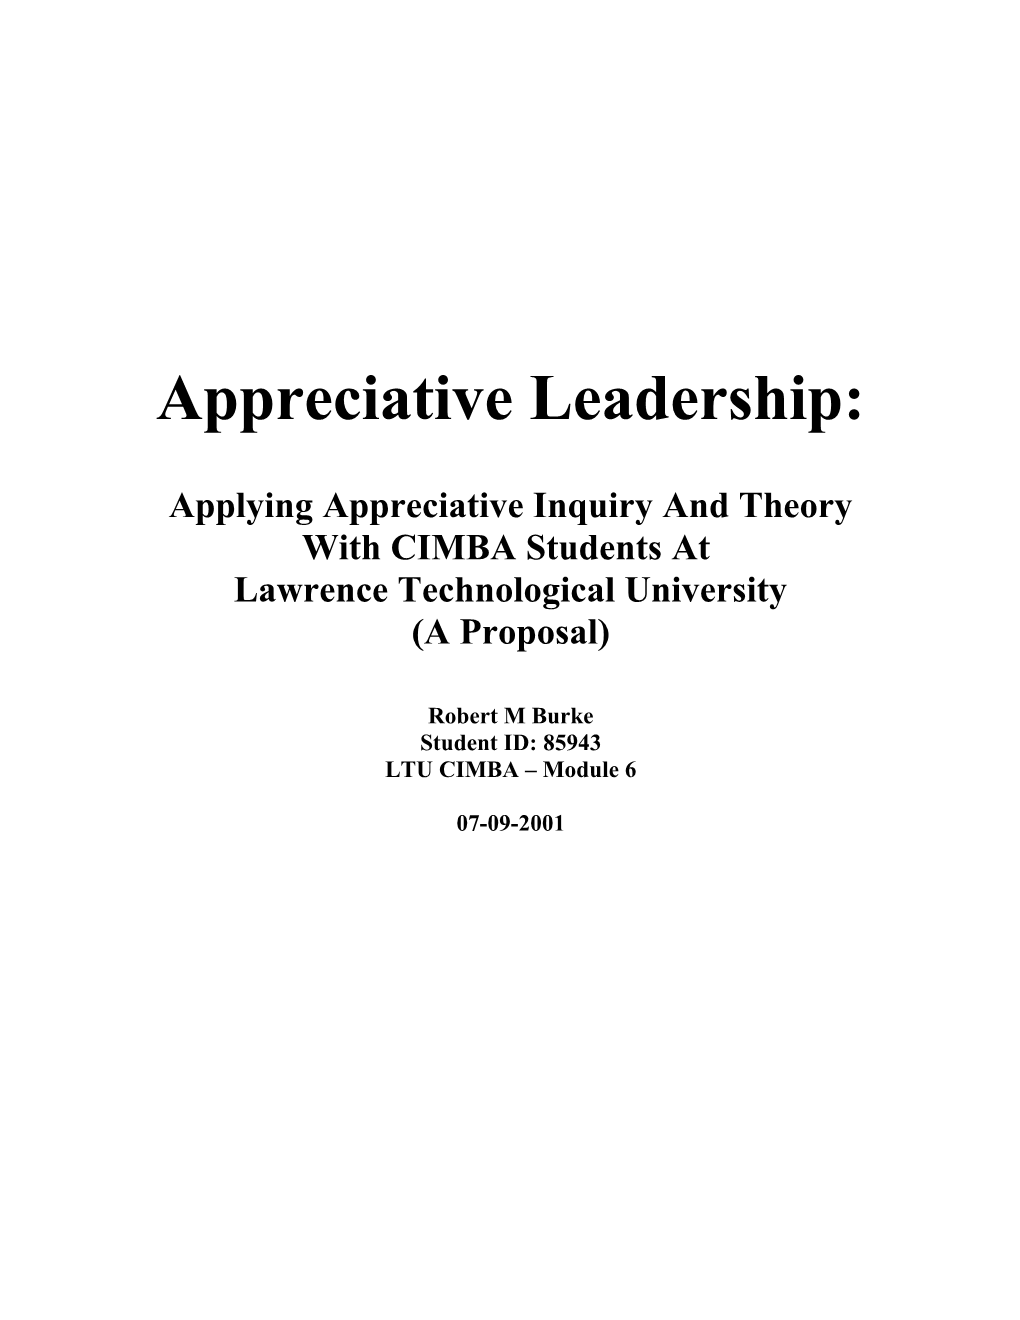 Applying Appreciative Inquiry and Theory with CIMBA Students At